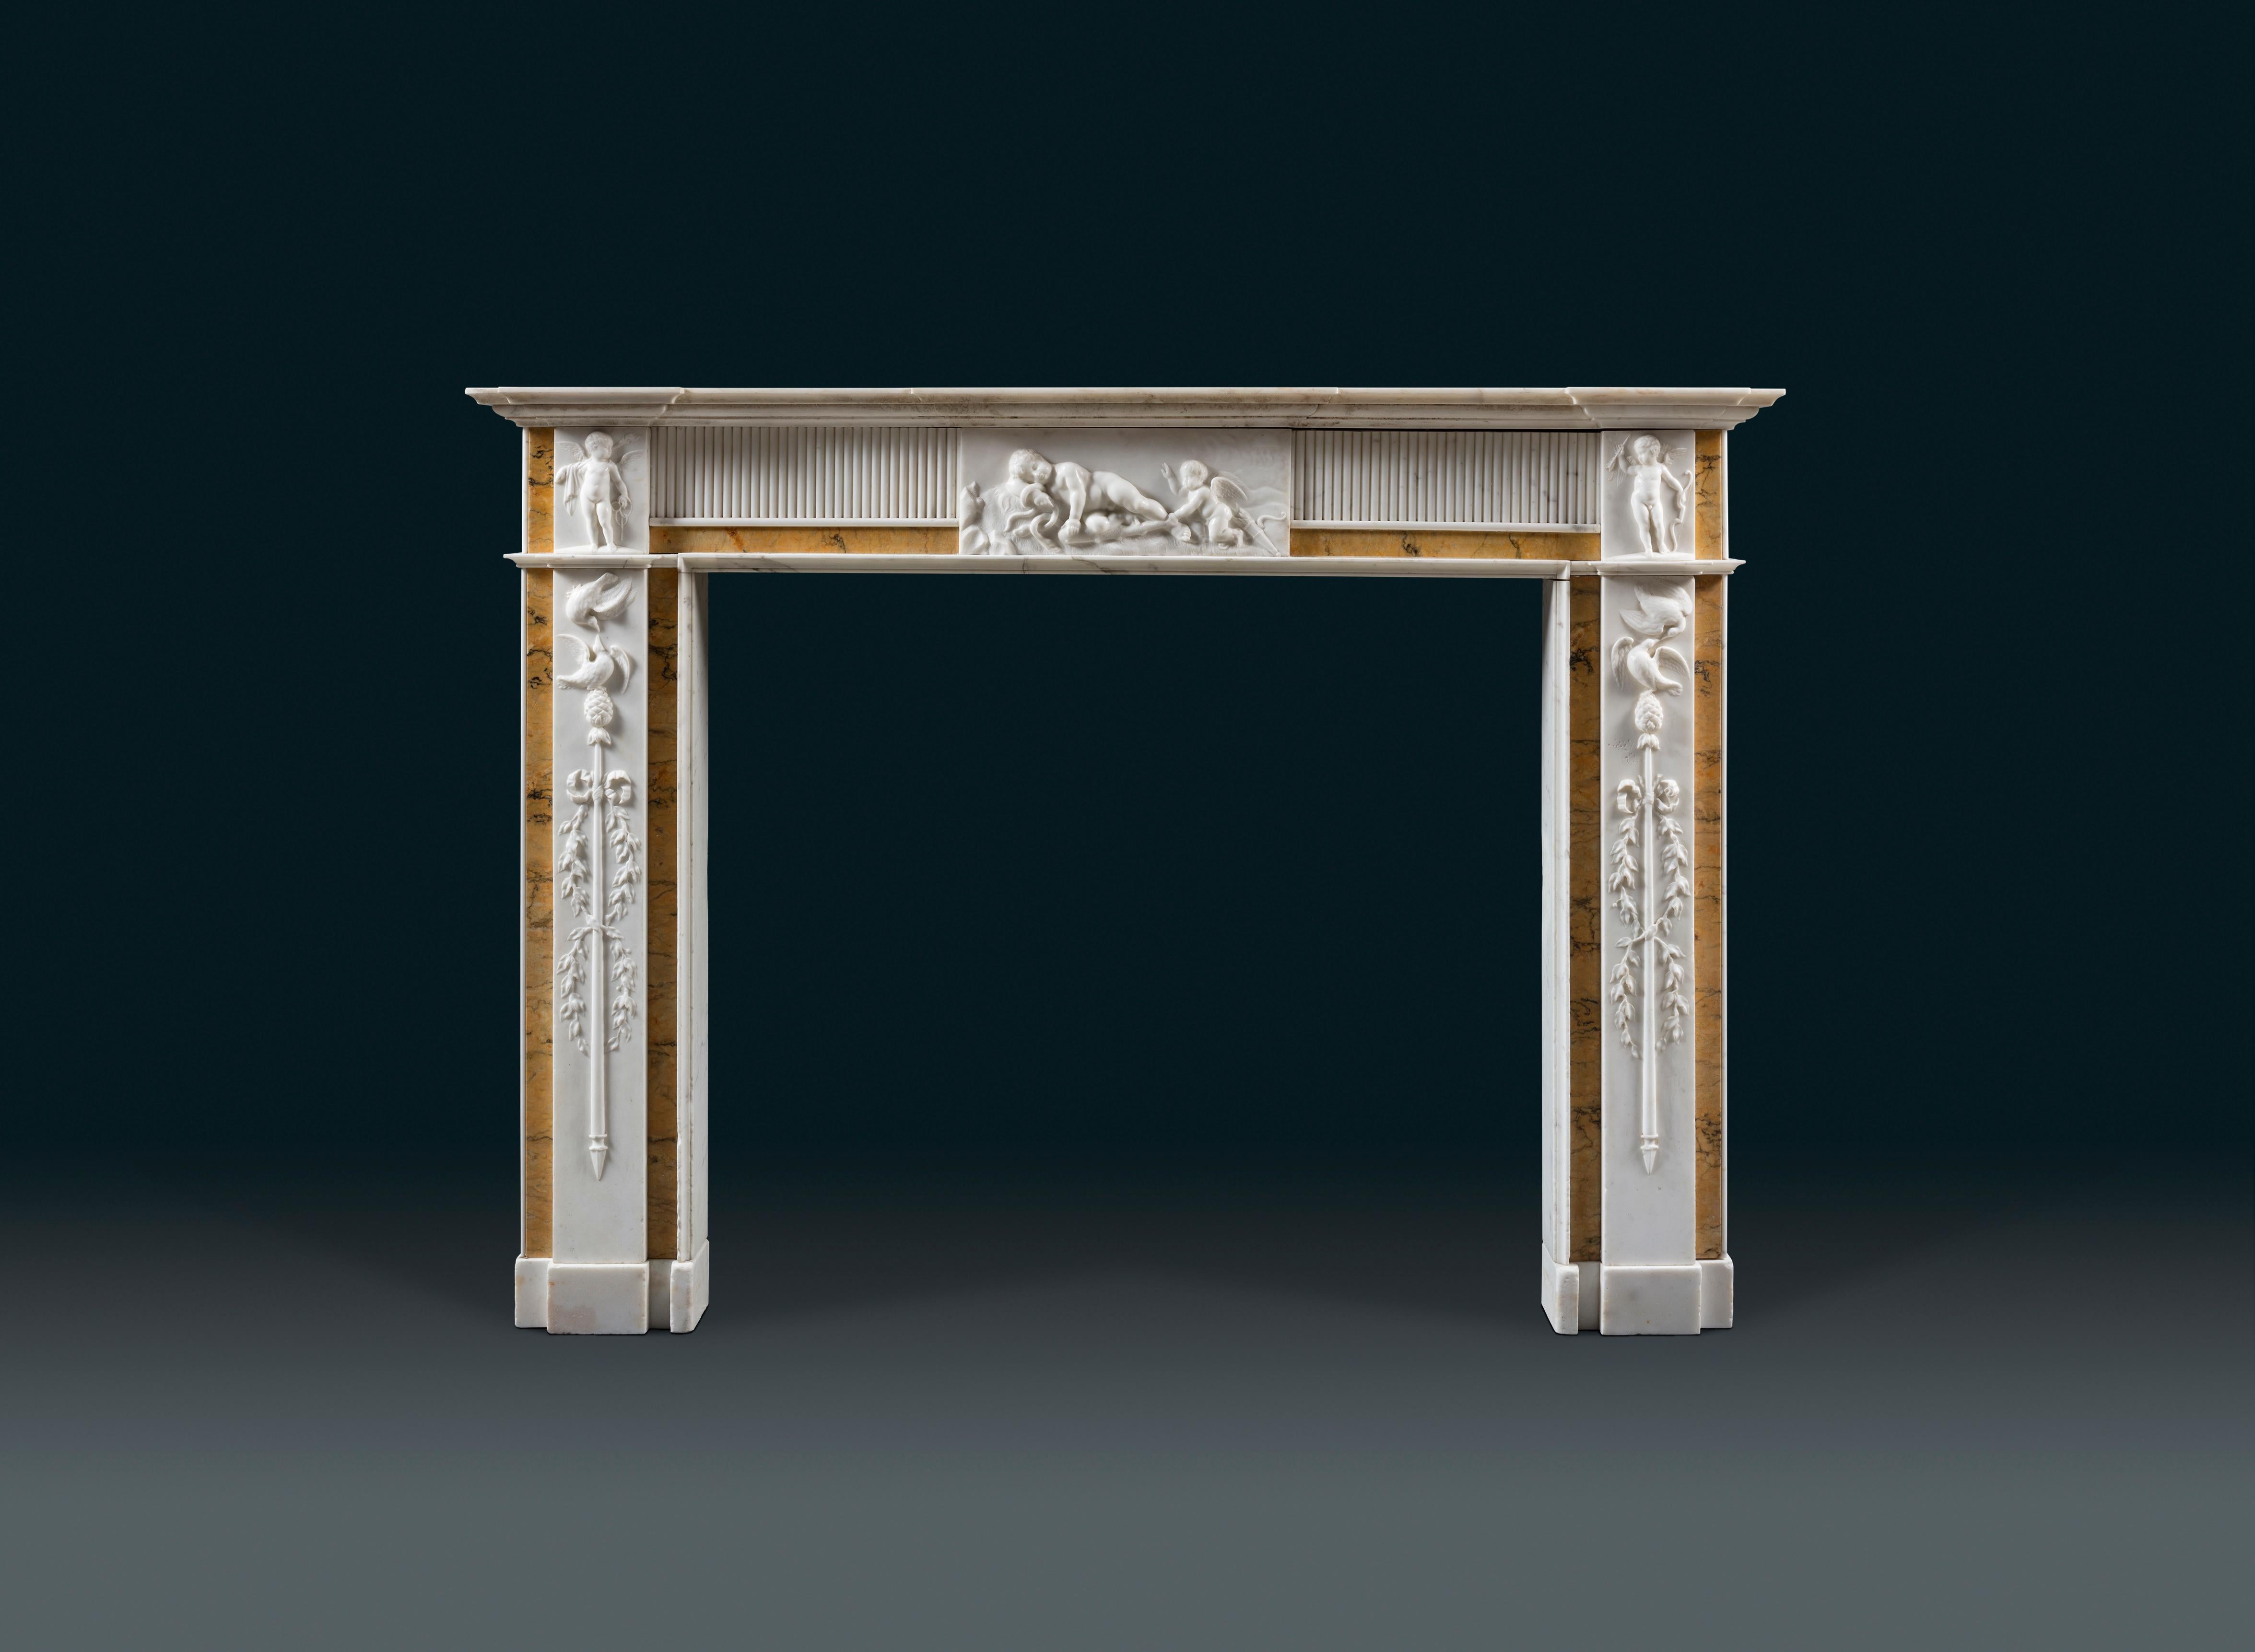 Carved Irish George III Neoclassical Mantle in Statuary Marble with Sienna Inlays